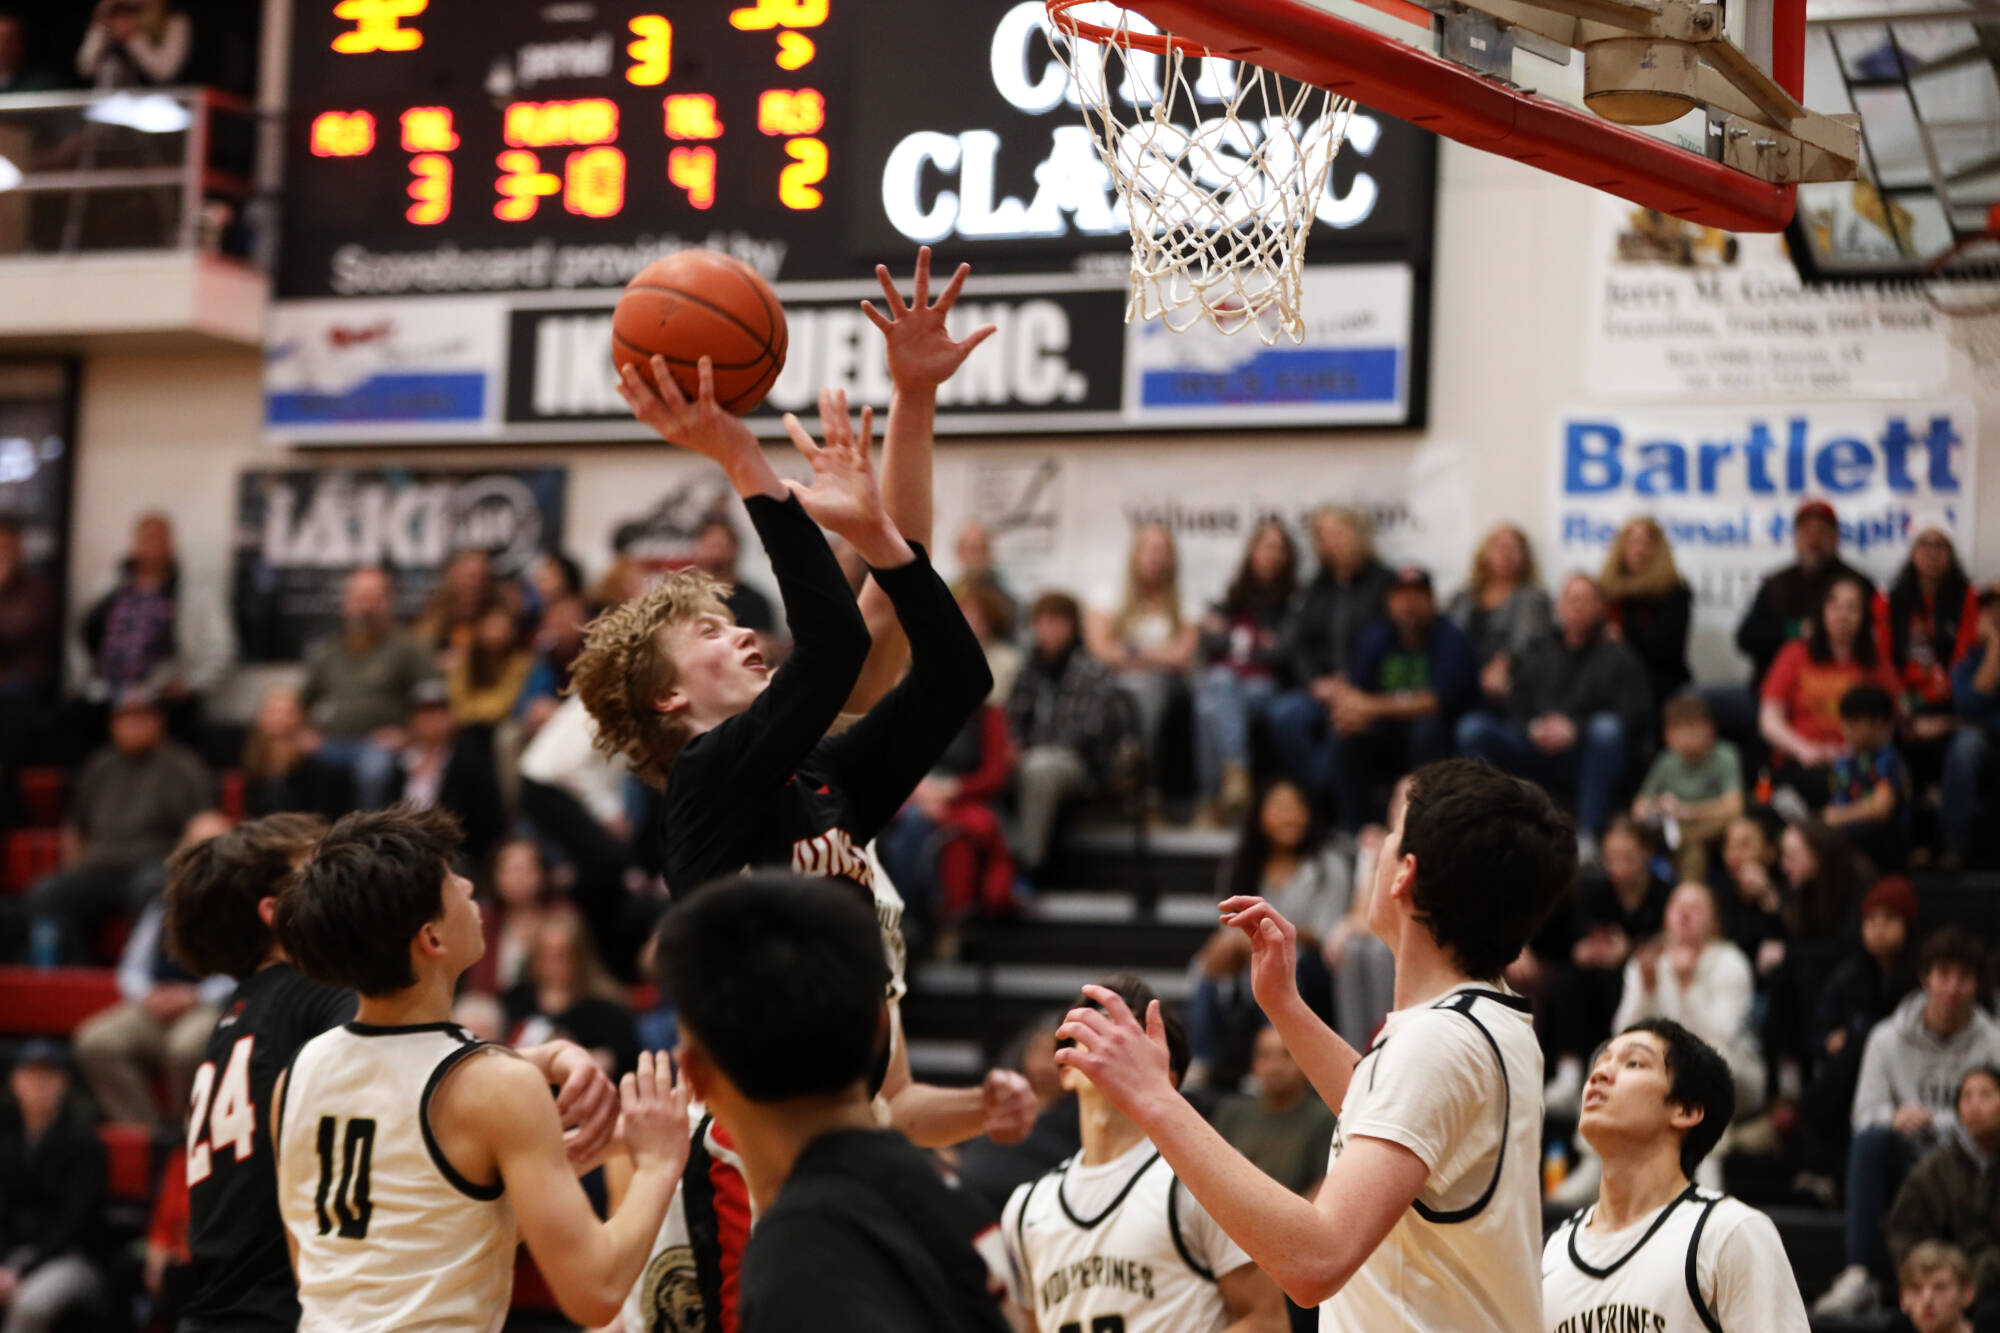 Junior guard Sean Oliver pushes through a crowd of players for a layup during the third period during Thursday night’s game against South Anchorage High School during the first night of the Princess Cruises Capital City Classic. (Clarise Larson / Juneau Empire)